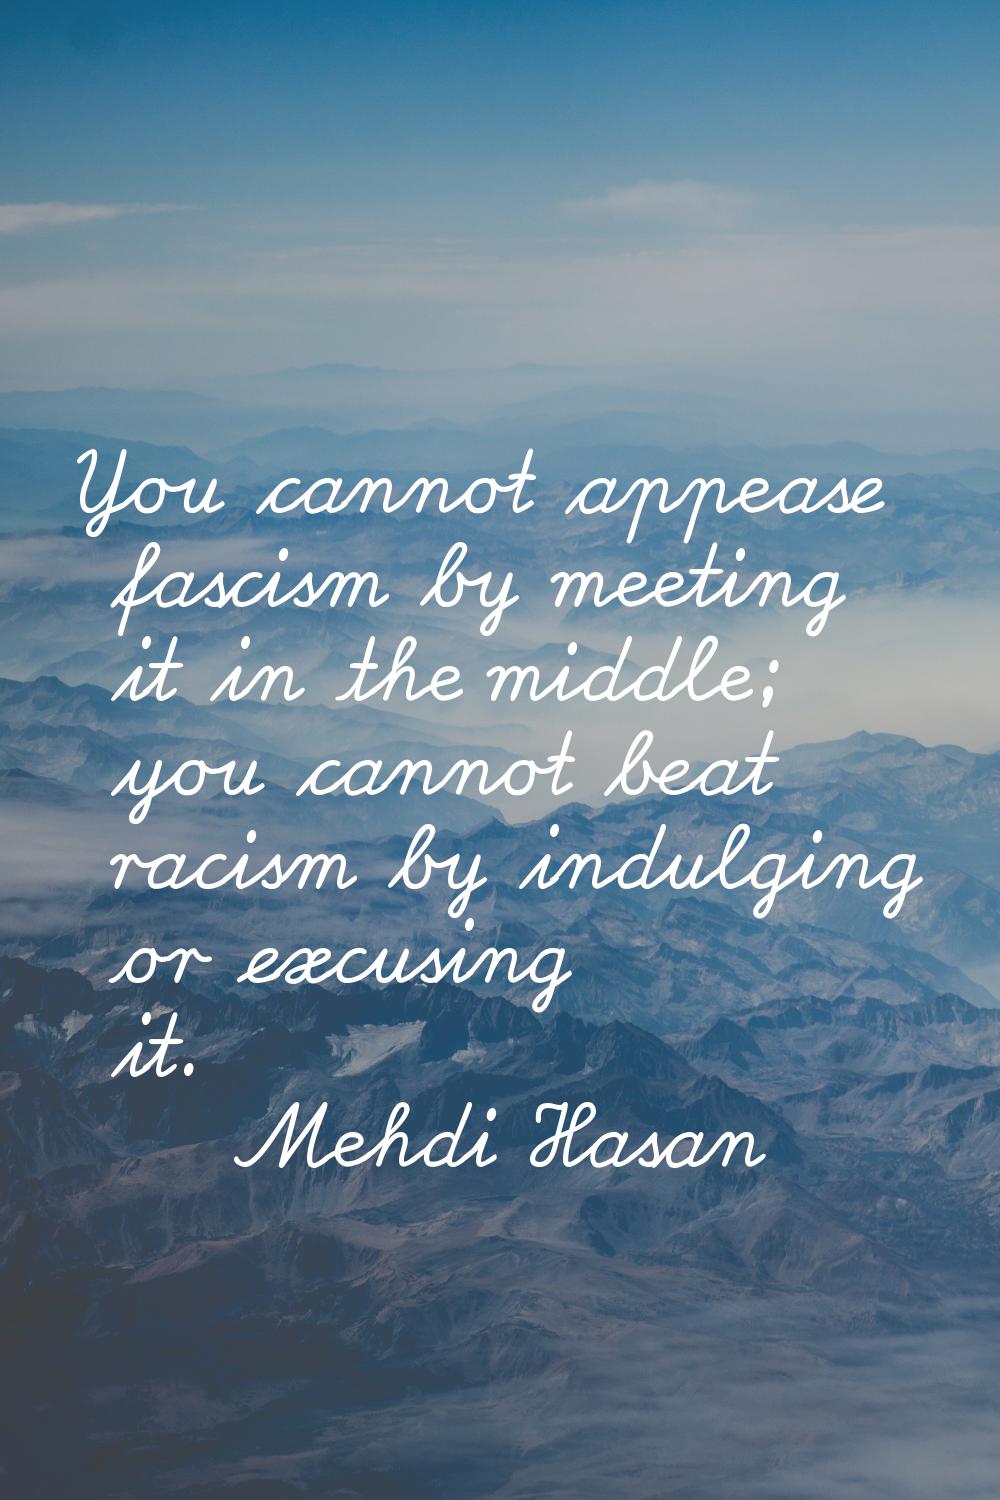 You cannot appease fascism by meeting it in the middle; you cannot beat racism by indulging or excu